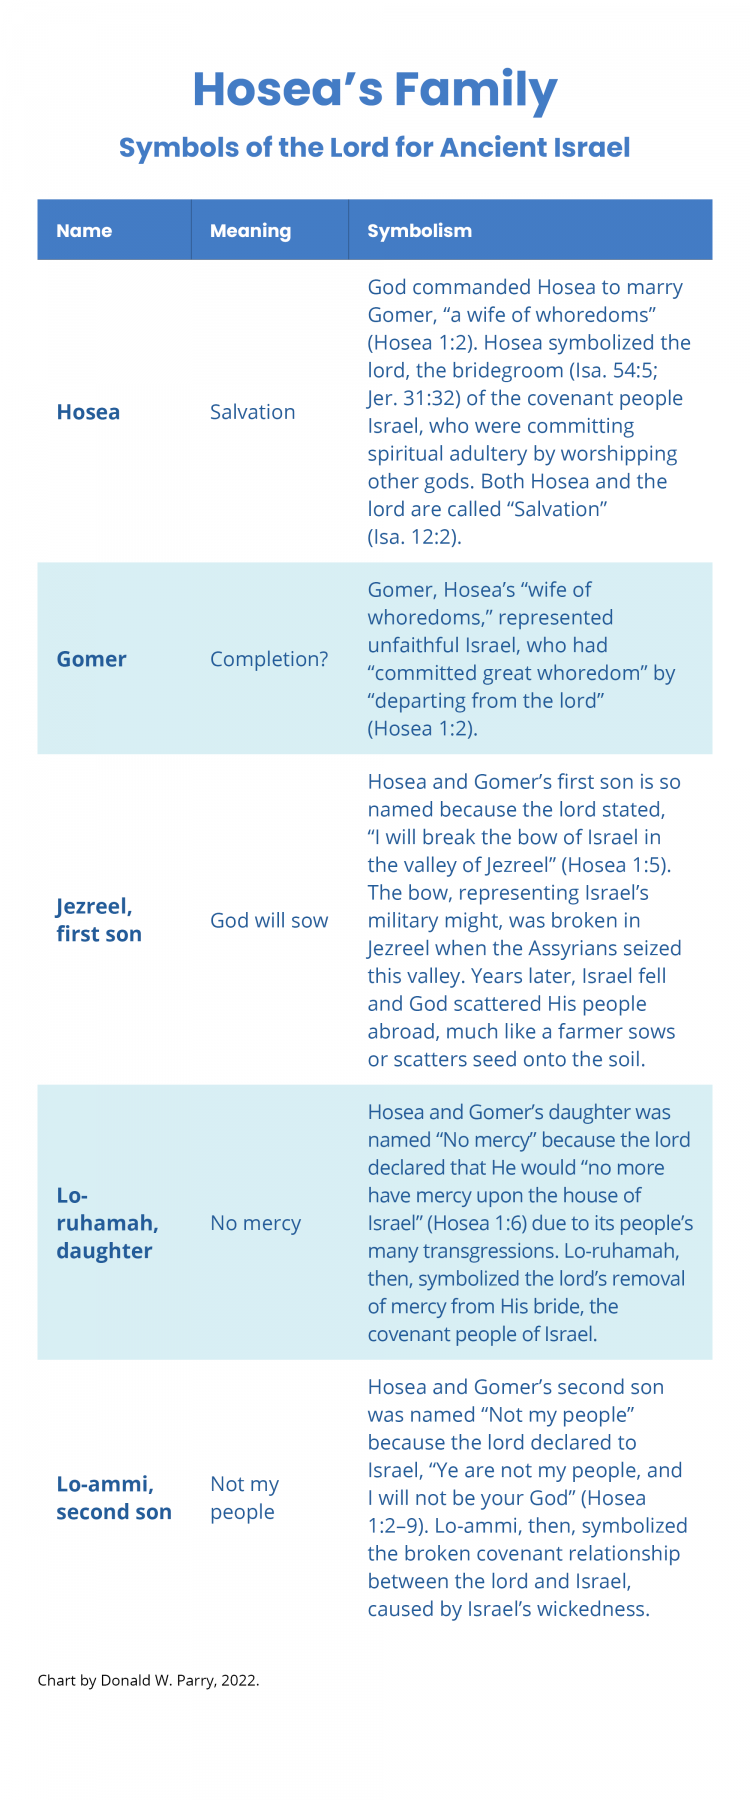 Chart by Donald W. Parry. Hosea's Family: Symbols of the Lord for Ancient Israel.